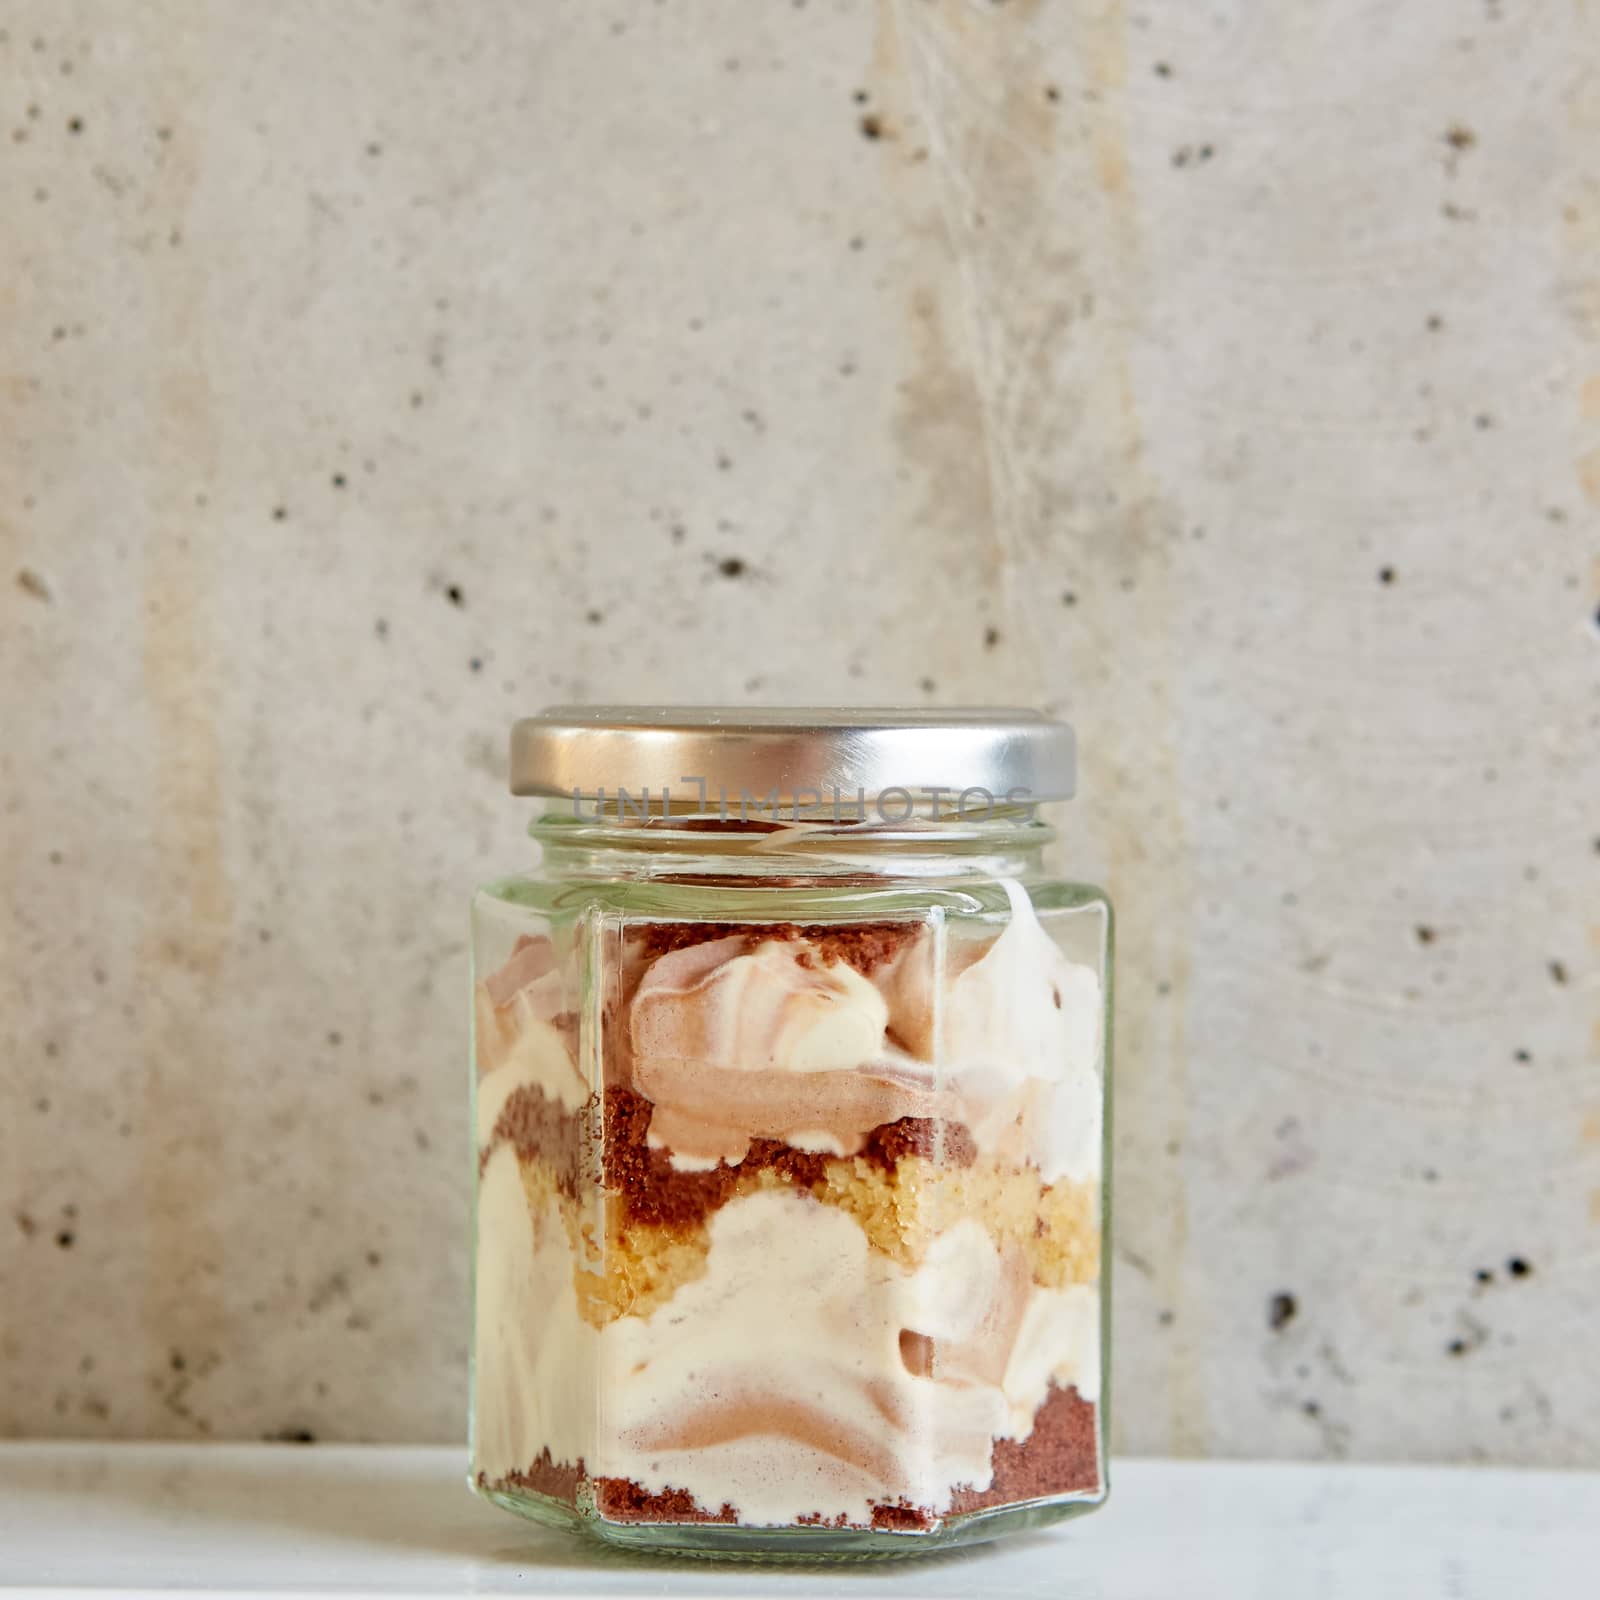 Homemade cheesecake in a glass jar on gray background